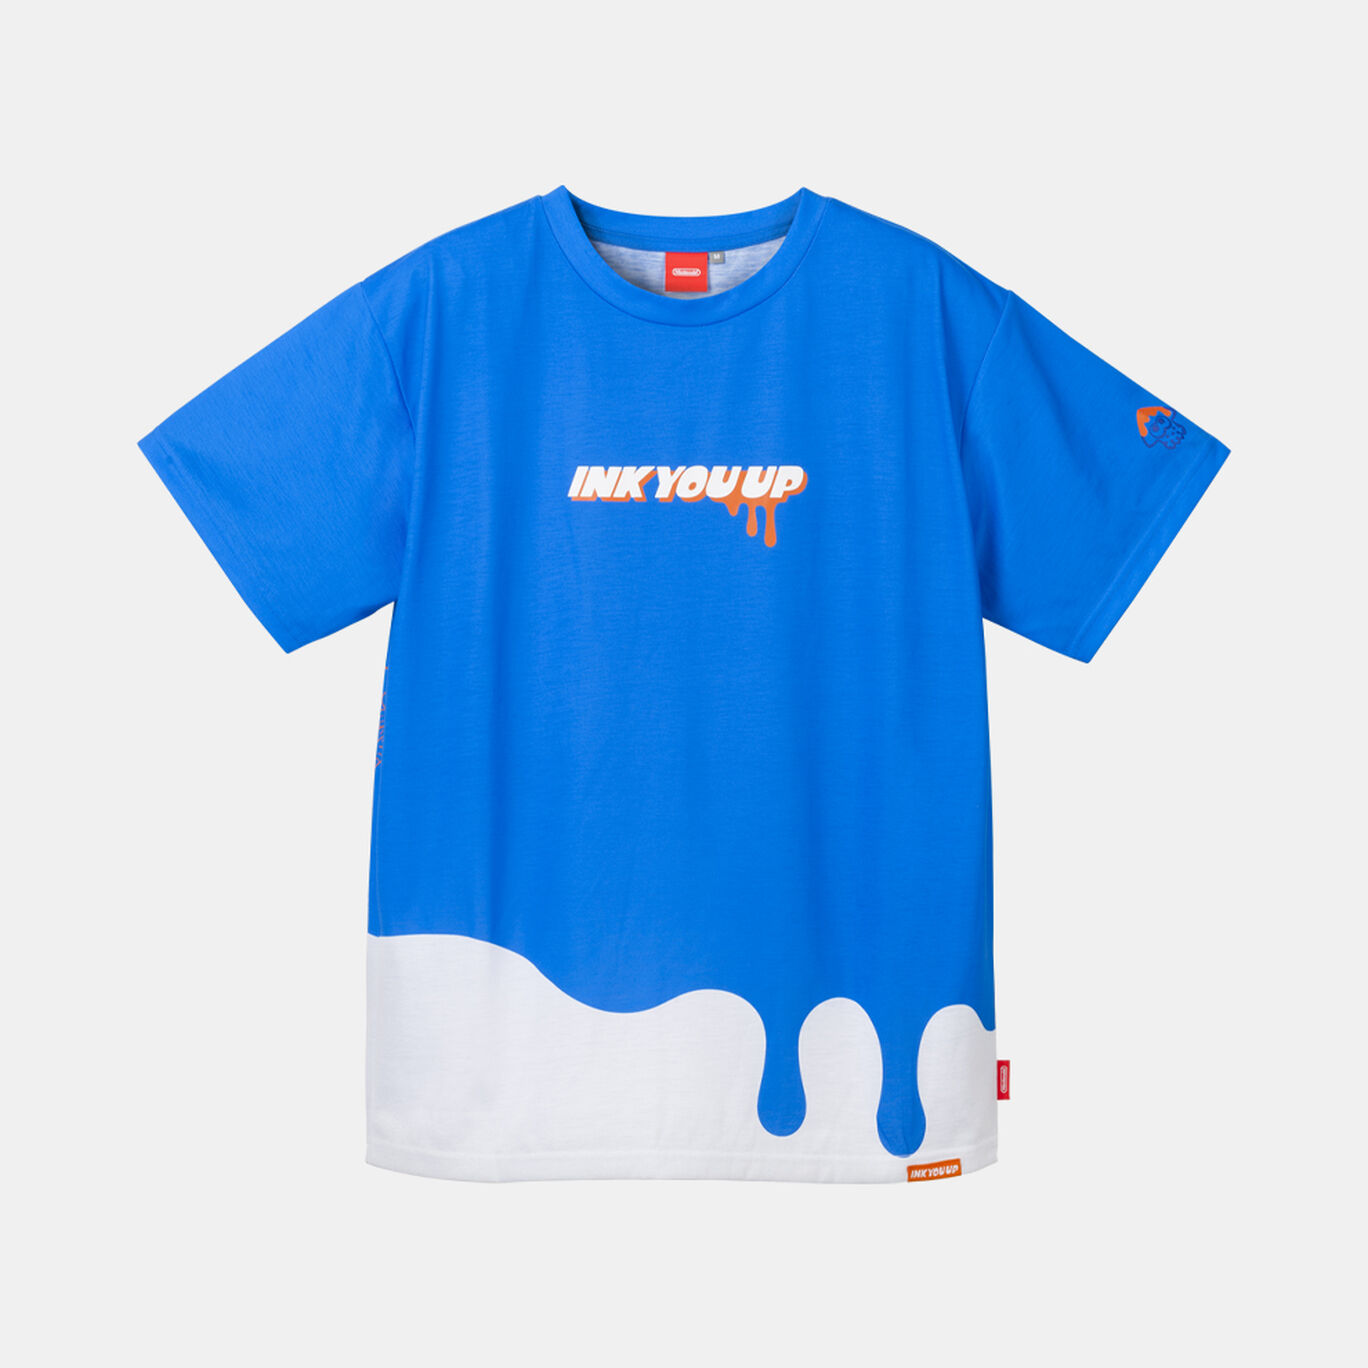 Tシャツ A 130 INK YOU UP【Nintendo TOKYO取り扱い商品】